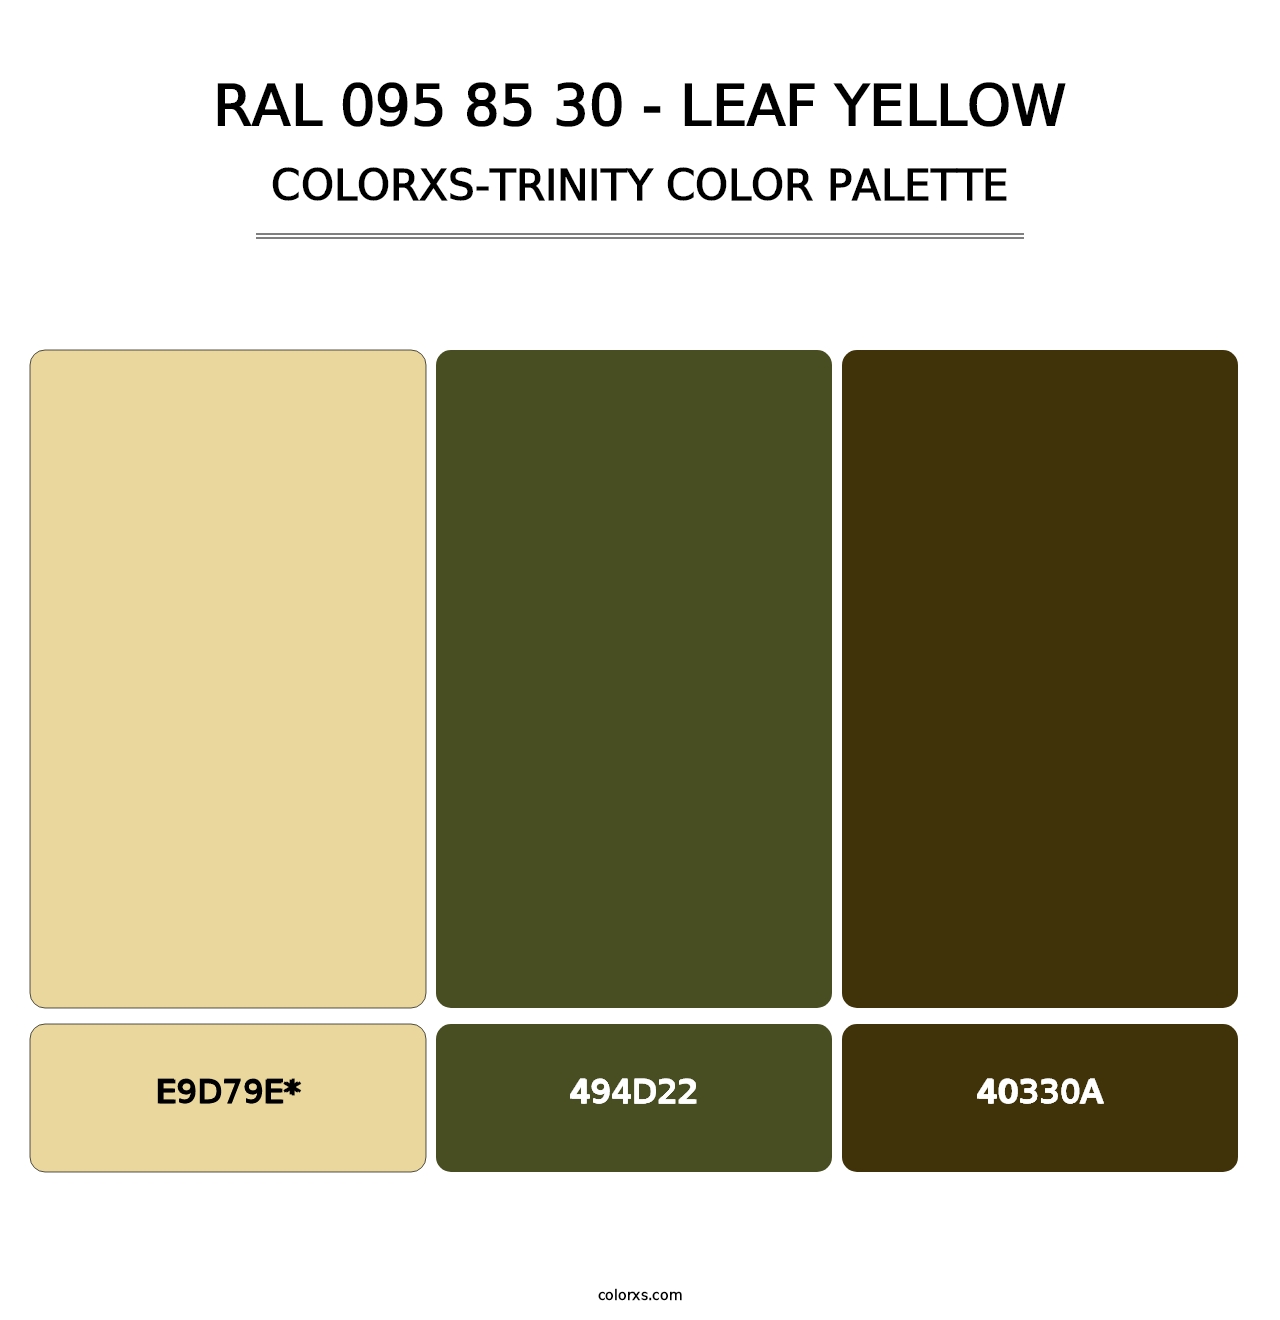 RAL 095 85 30 - Leaf Yellow - Colorxs Trinity Palette